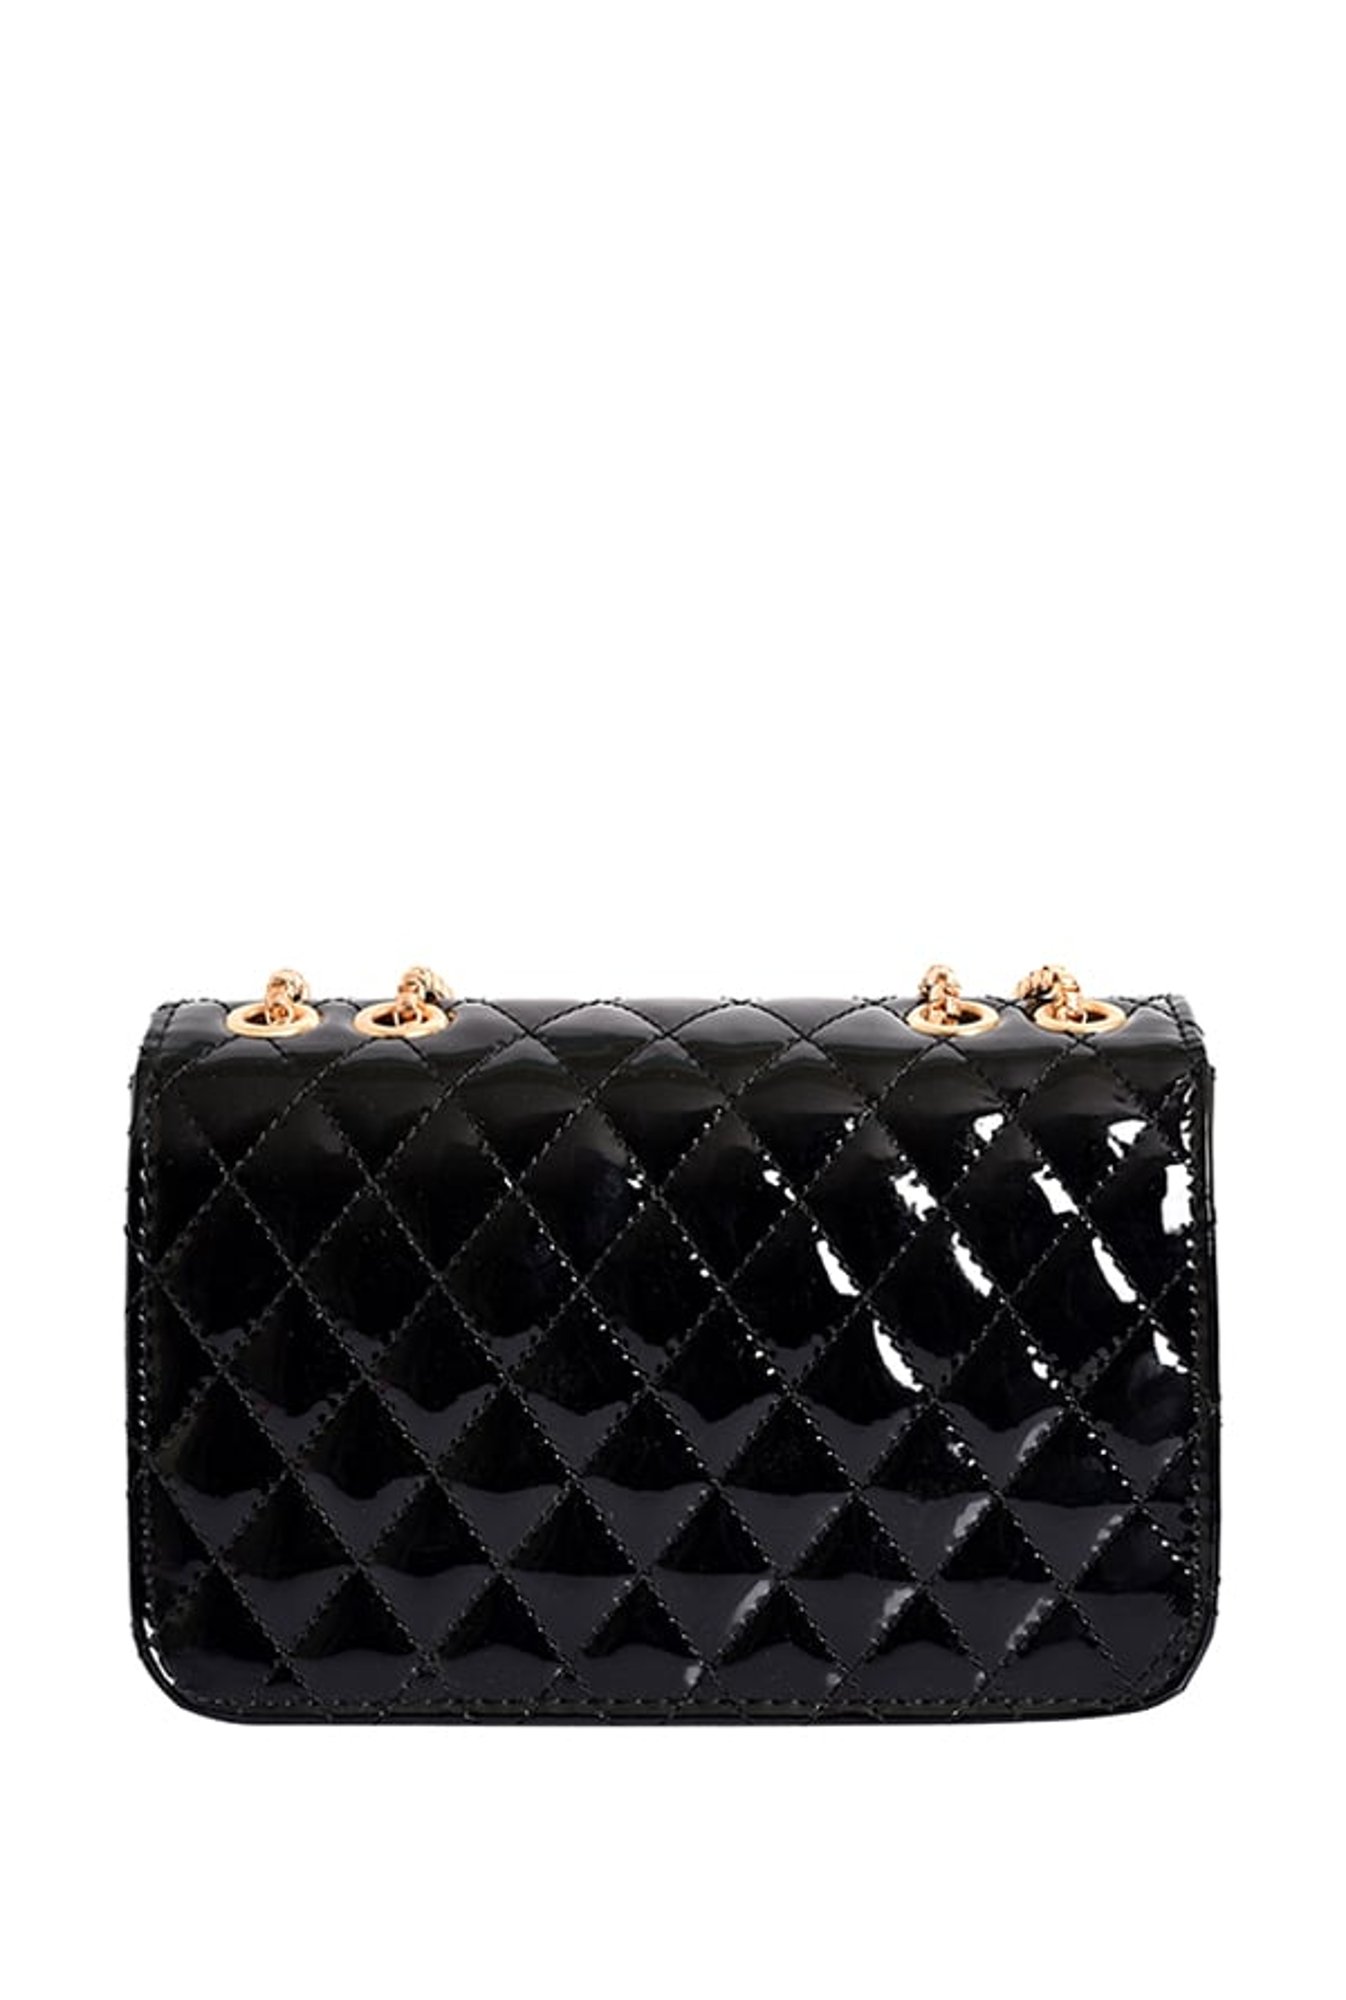 Túi Charles & Keith Double Chain Handle Quilted Bag Black CK2-20681002-3  màu đen